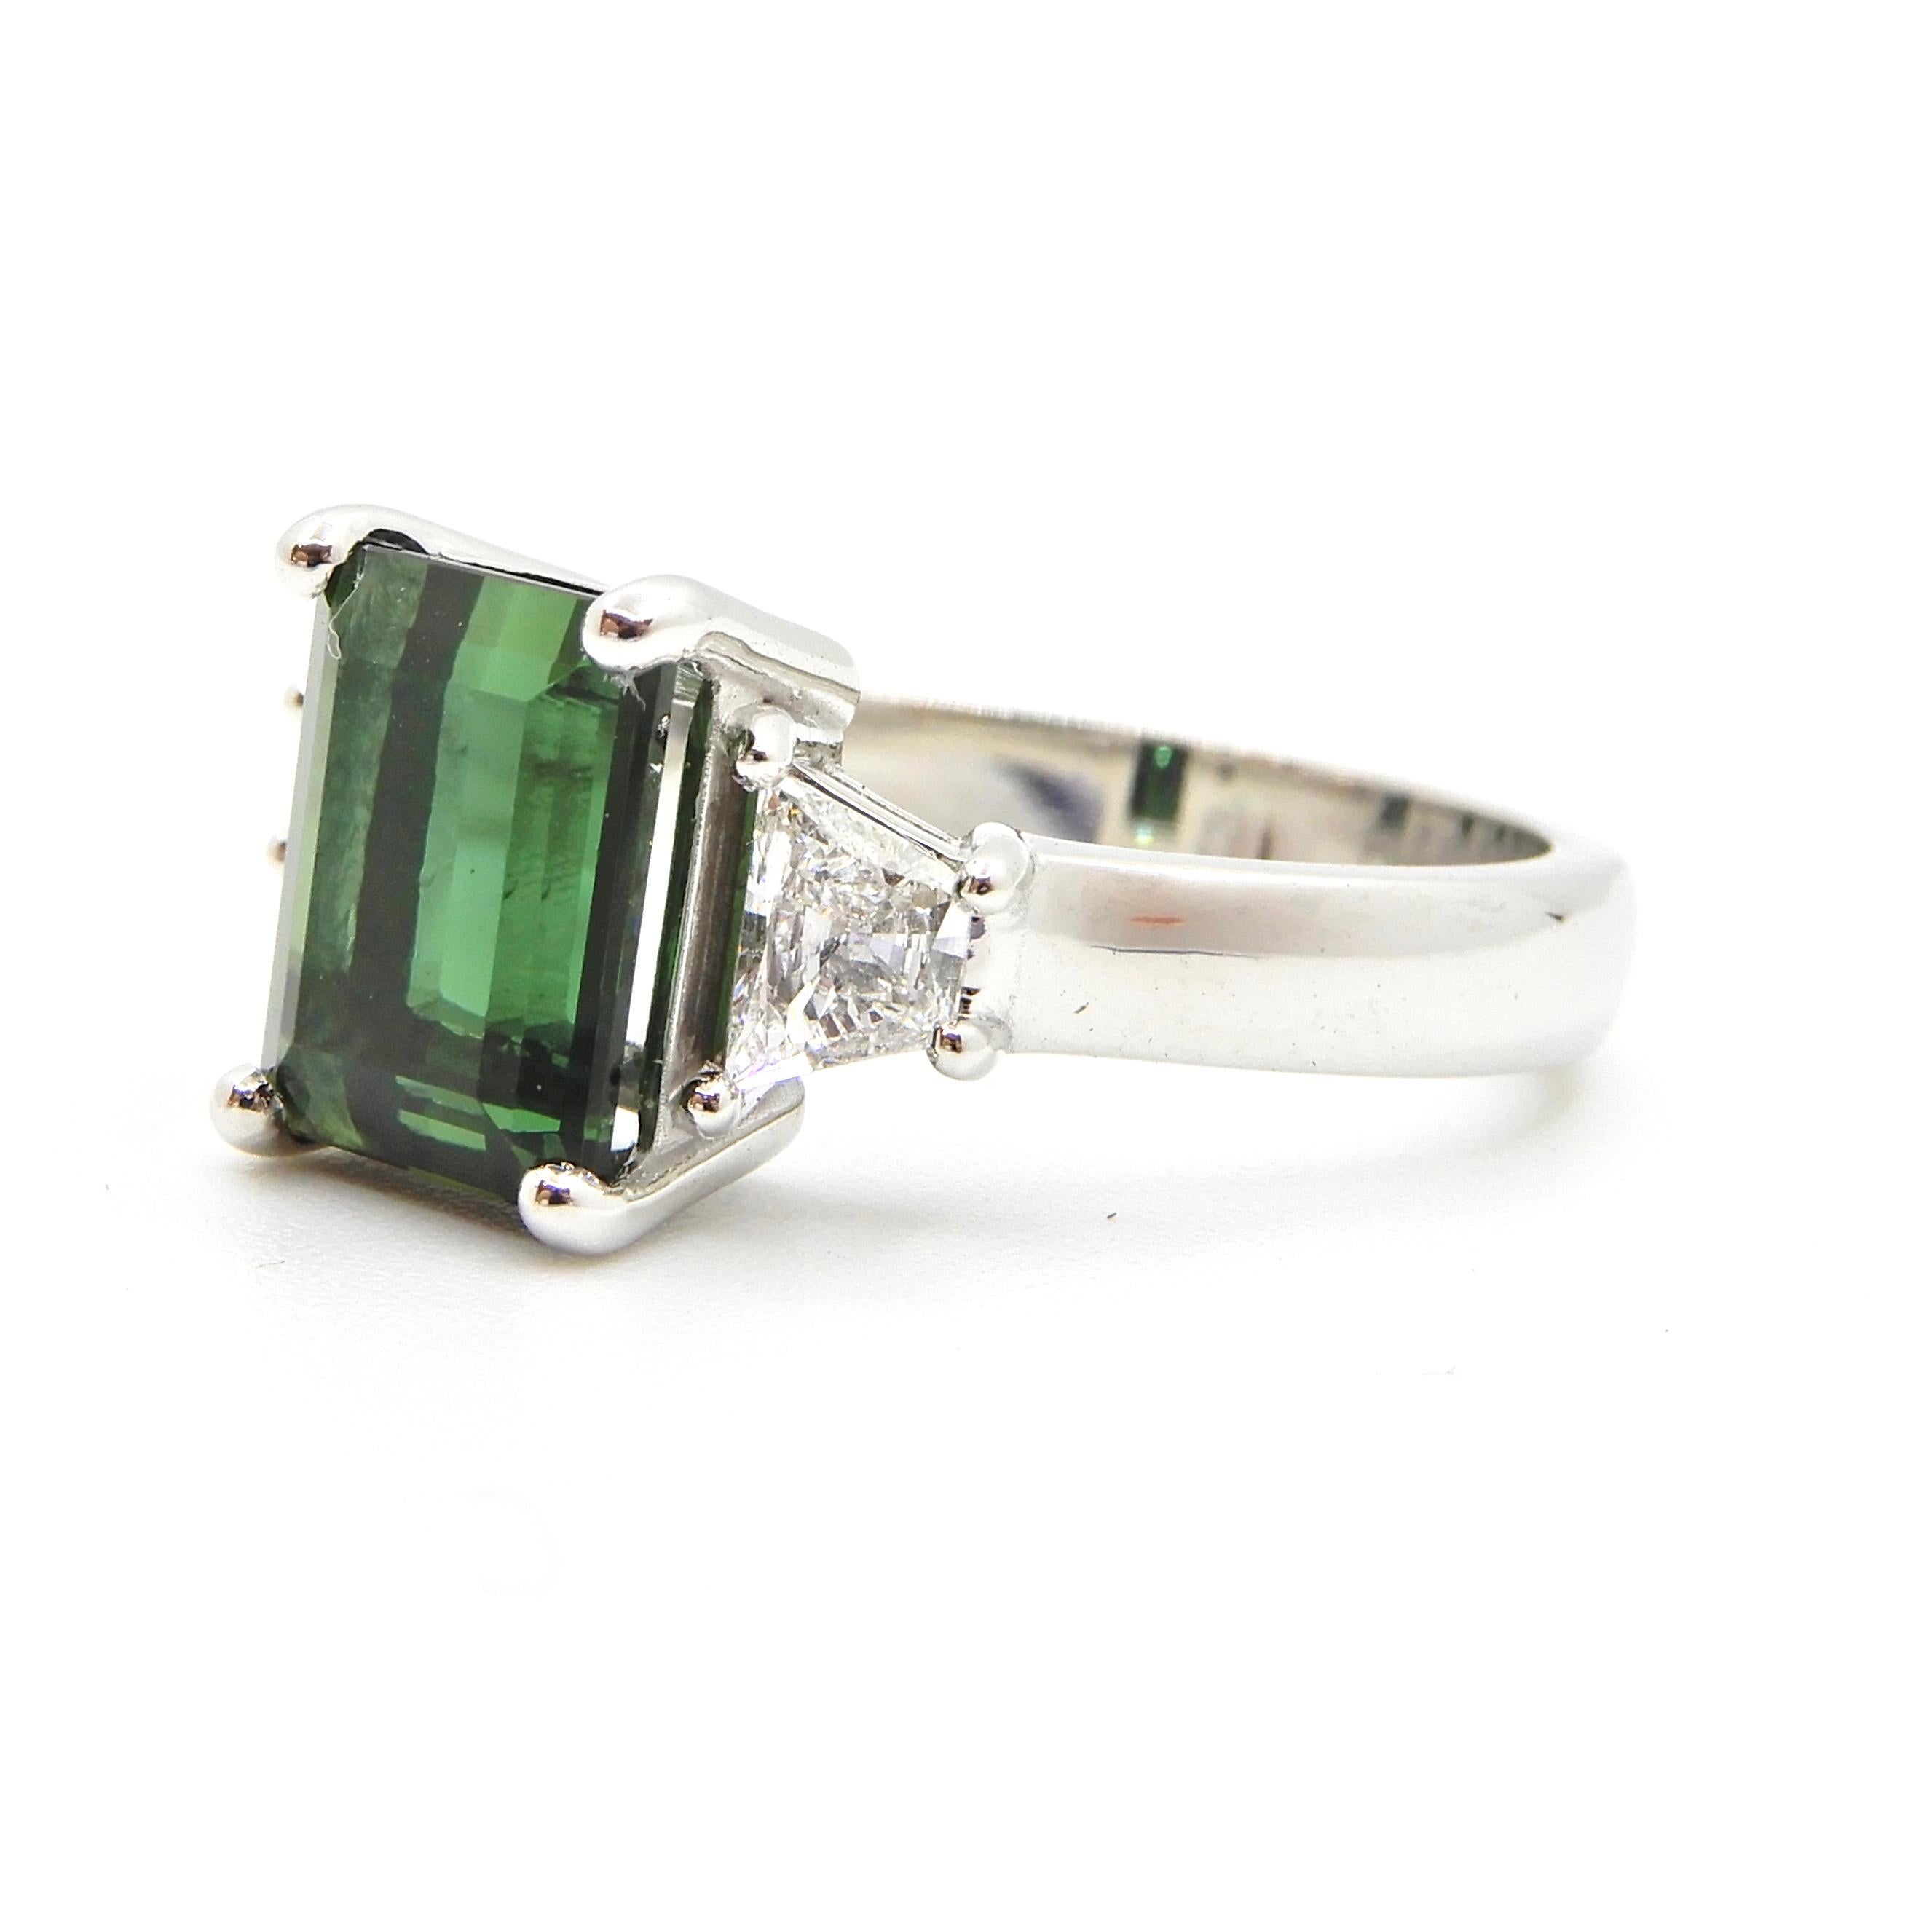 Emerald Cut 2.86 Carat Green Tourmaline and Diamond Cocktail Ring For Sale